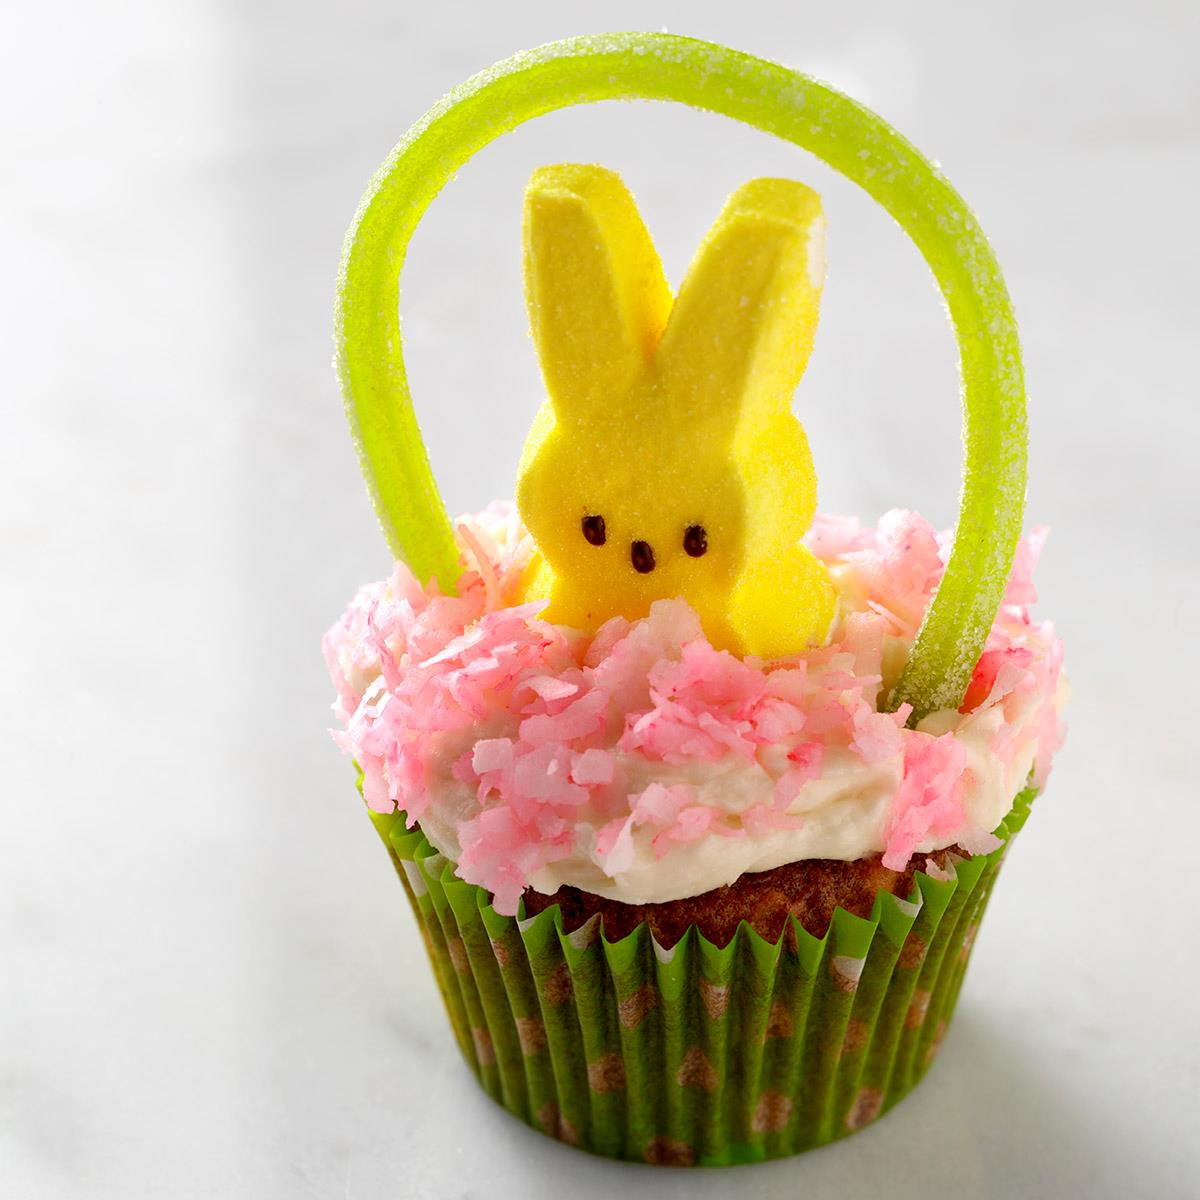 15 Of the Best Real Simple Easter Basket Cupcakes Ever